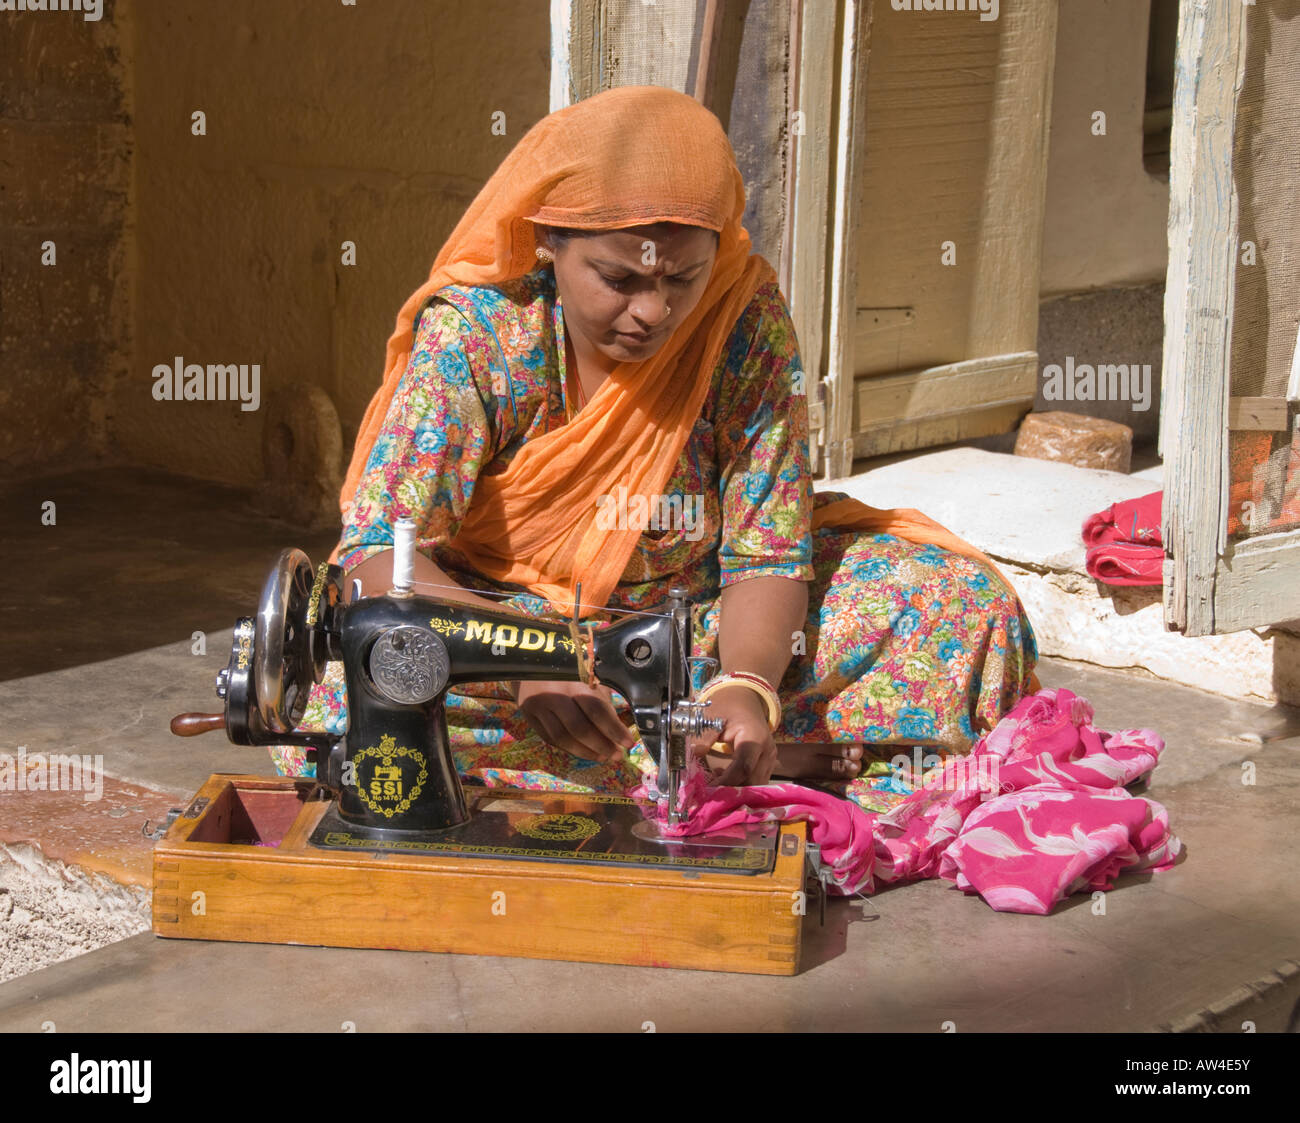 Portrait of a female entrepreneur sewing on an antique sewing machine in India. Stock Photo